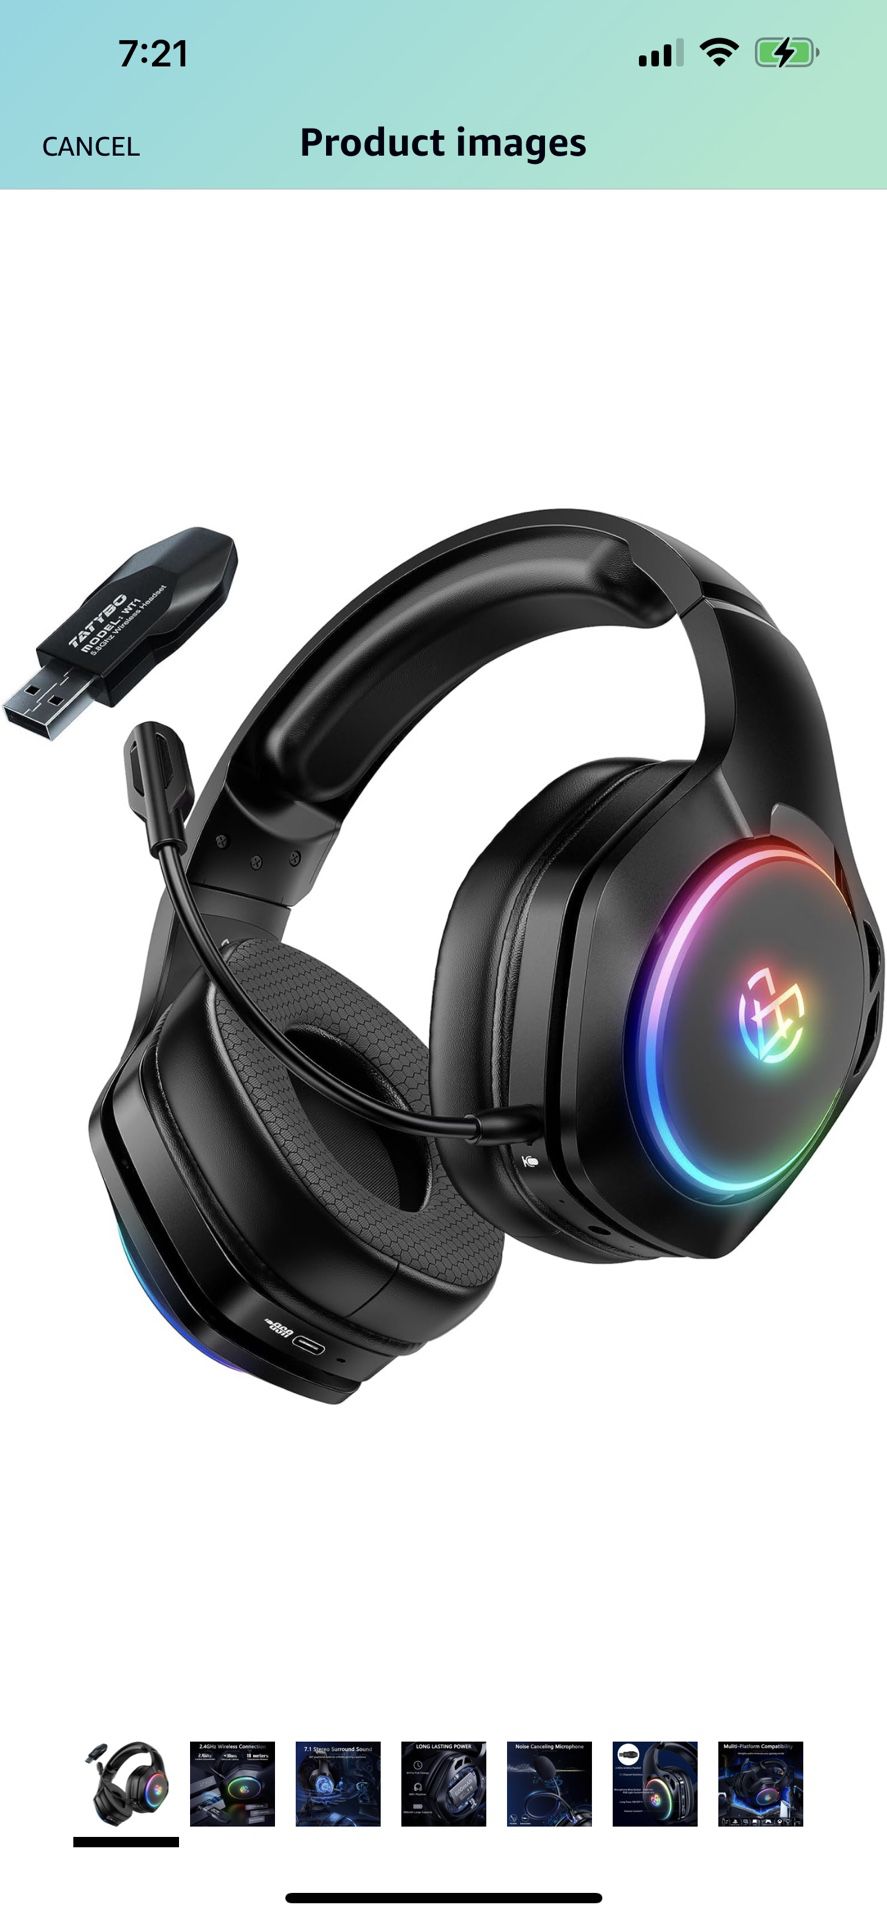 Wireless Gaming Headset for PS4, PS5, PC - 2.4GHz Gaming Headphones with Detachable Noise Canceling Microphone, 30-Hr Battery Gaming Headsets for Lapt